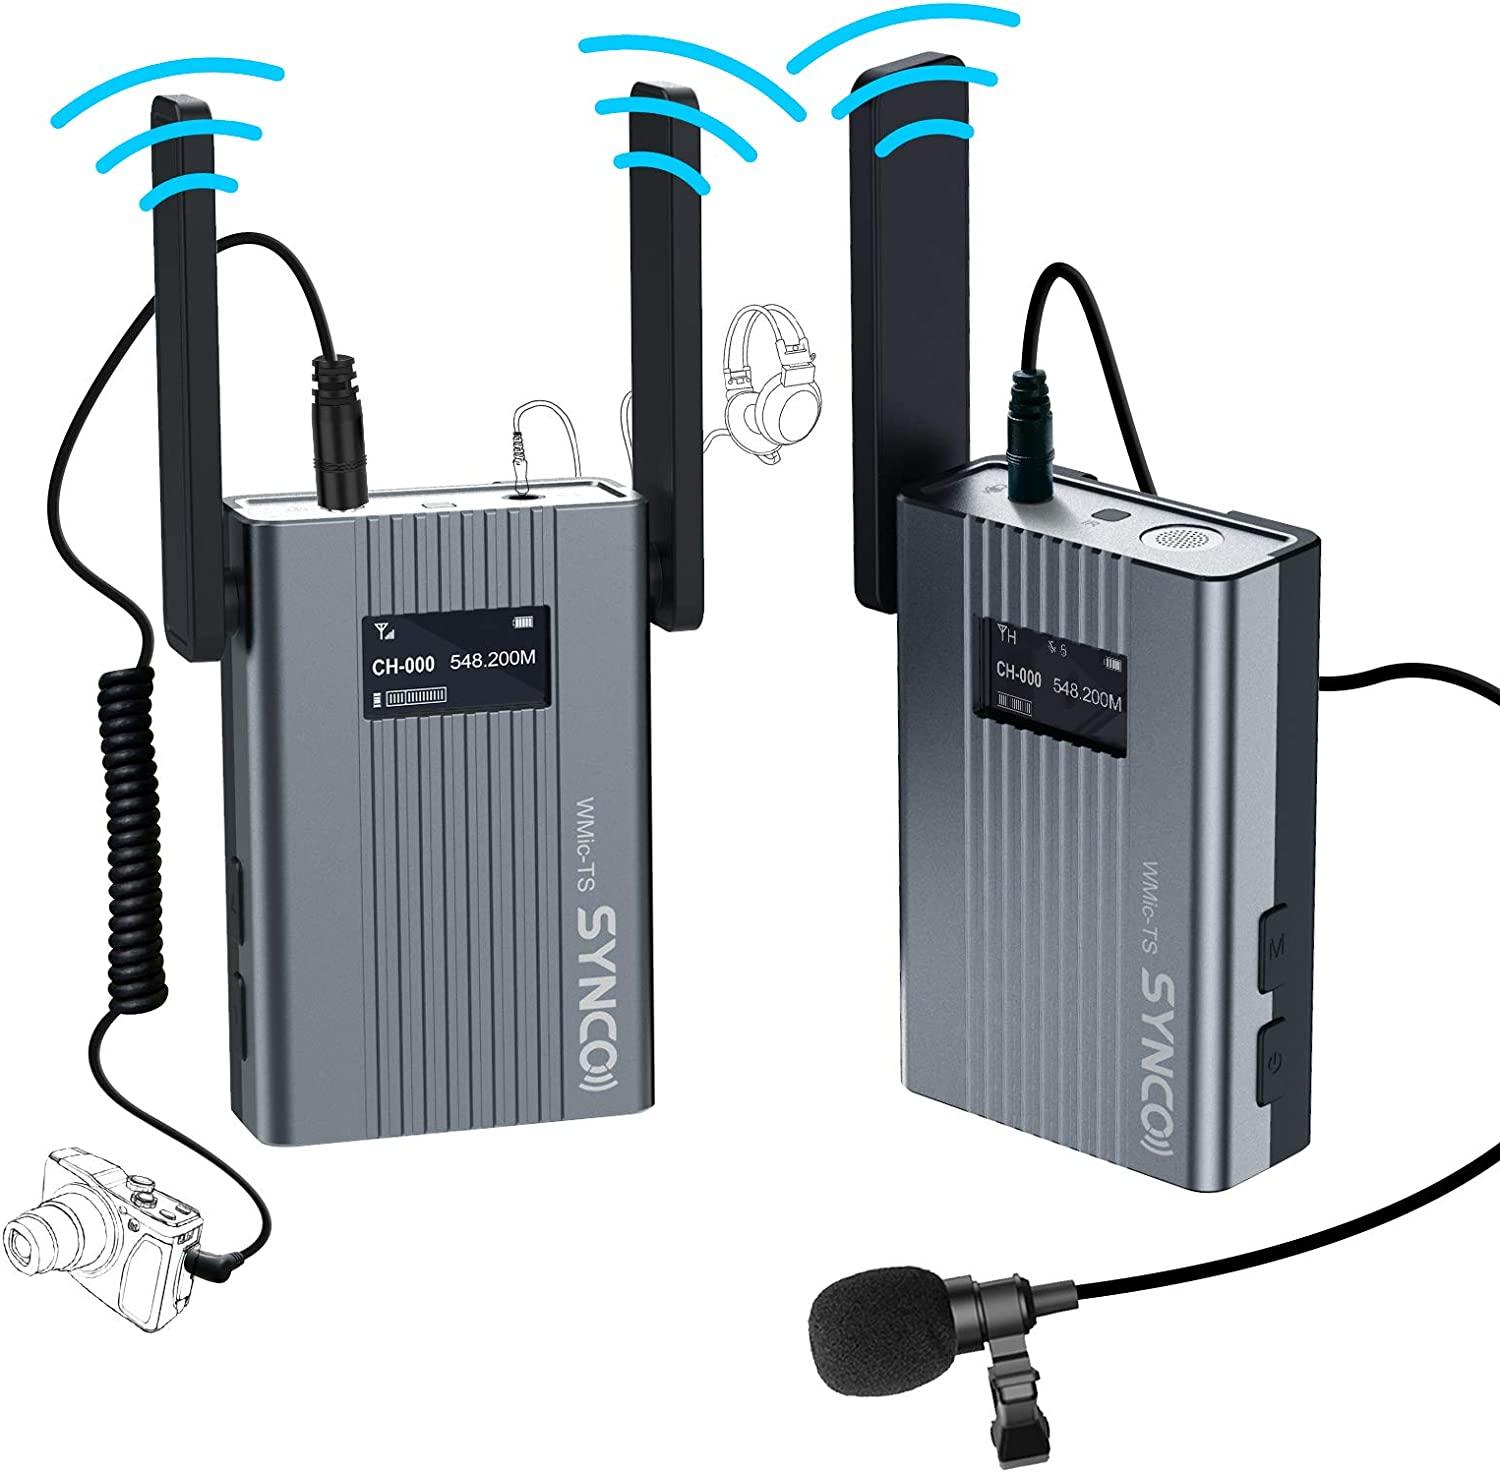 SYNCO-(TS-Mini)-UHF-Wireless-Lavalier-Microphone-System, 1 Transmitter 1 Receiver Mic 60 Channels Real-time Monitoring 492ft for Smartphone, DSLR/Mirrorless, Camcorder, Laptop, Tablet - Digitek